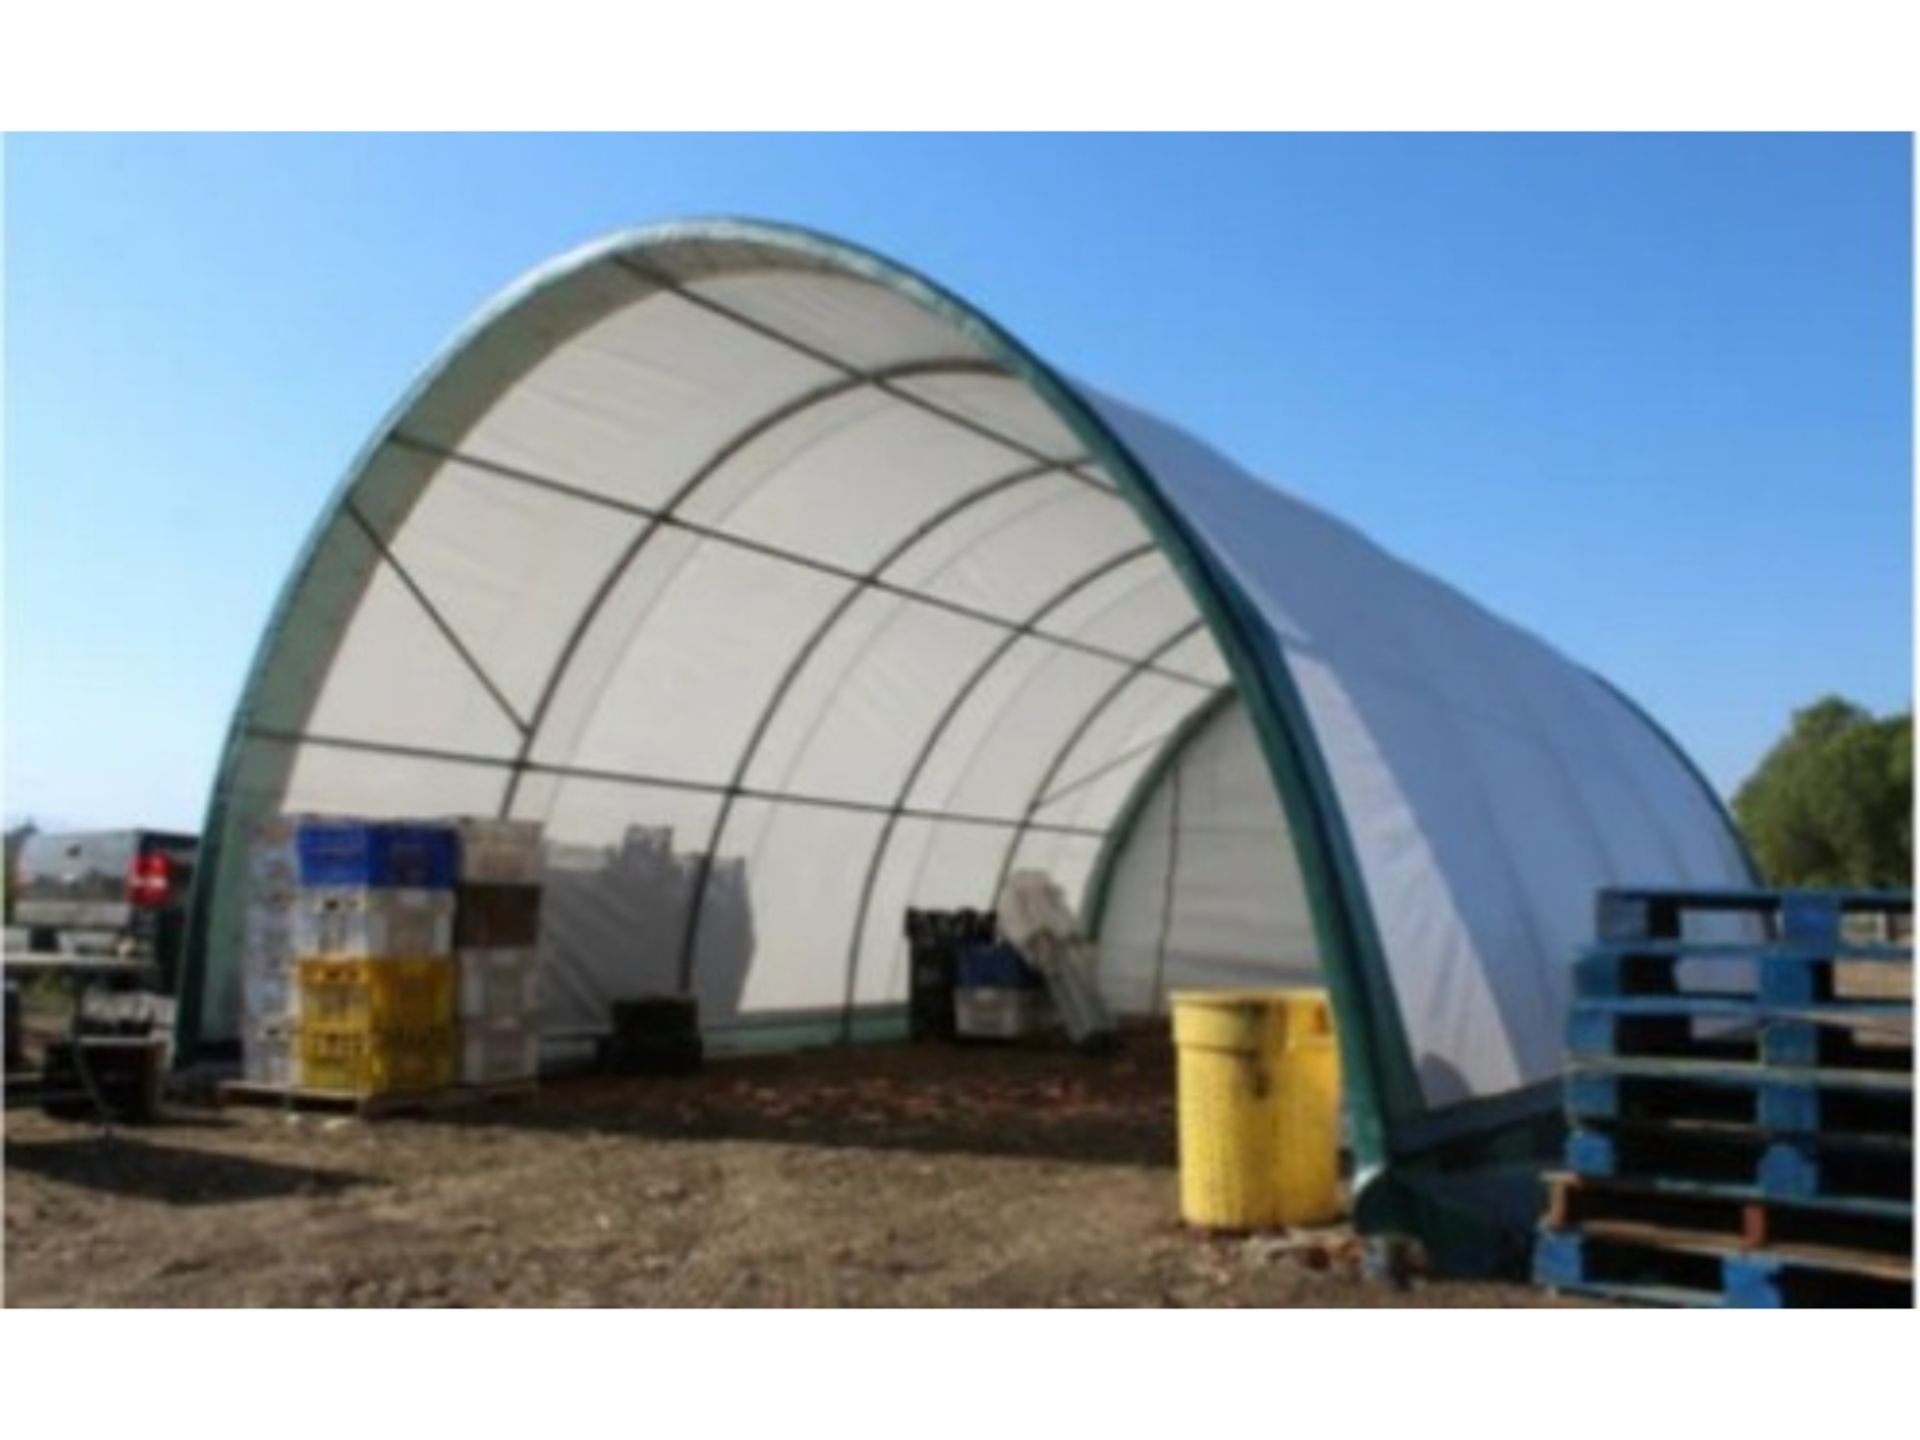 20' x 30' x 12' Dome Shelter - Image 6 of 6